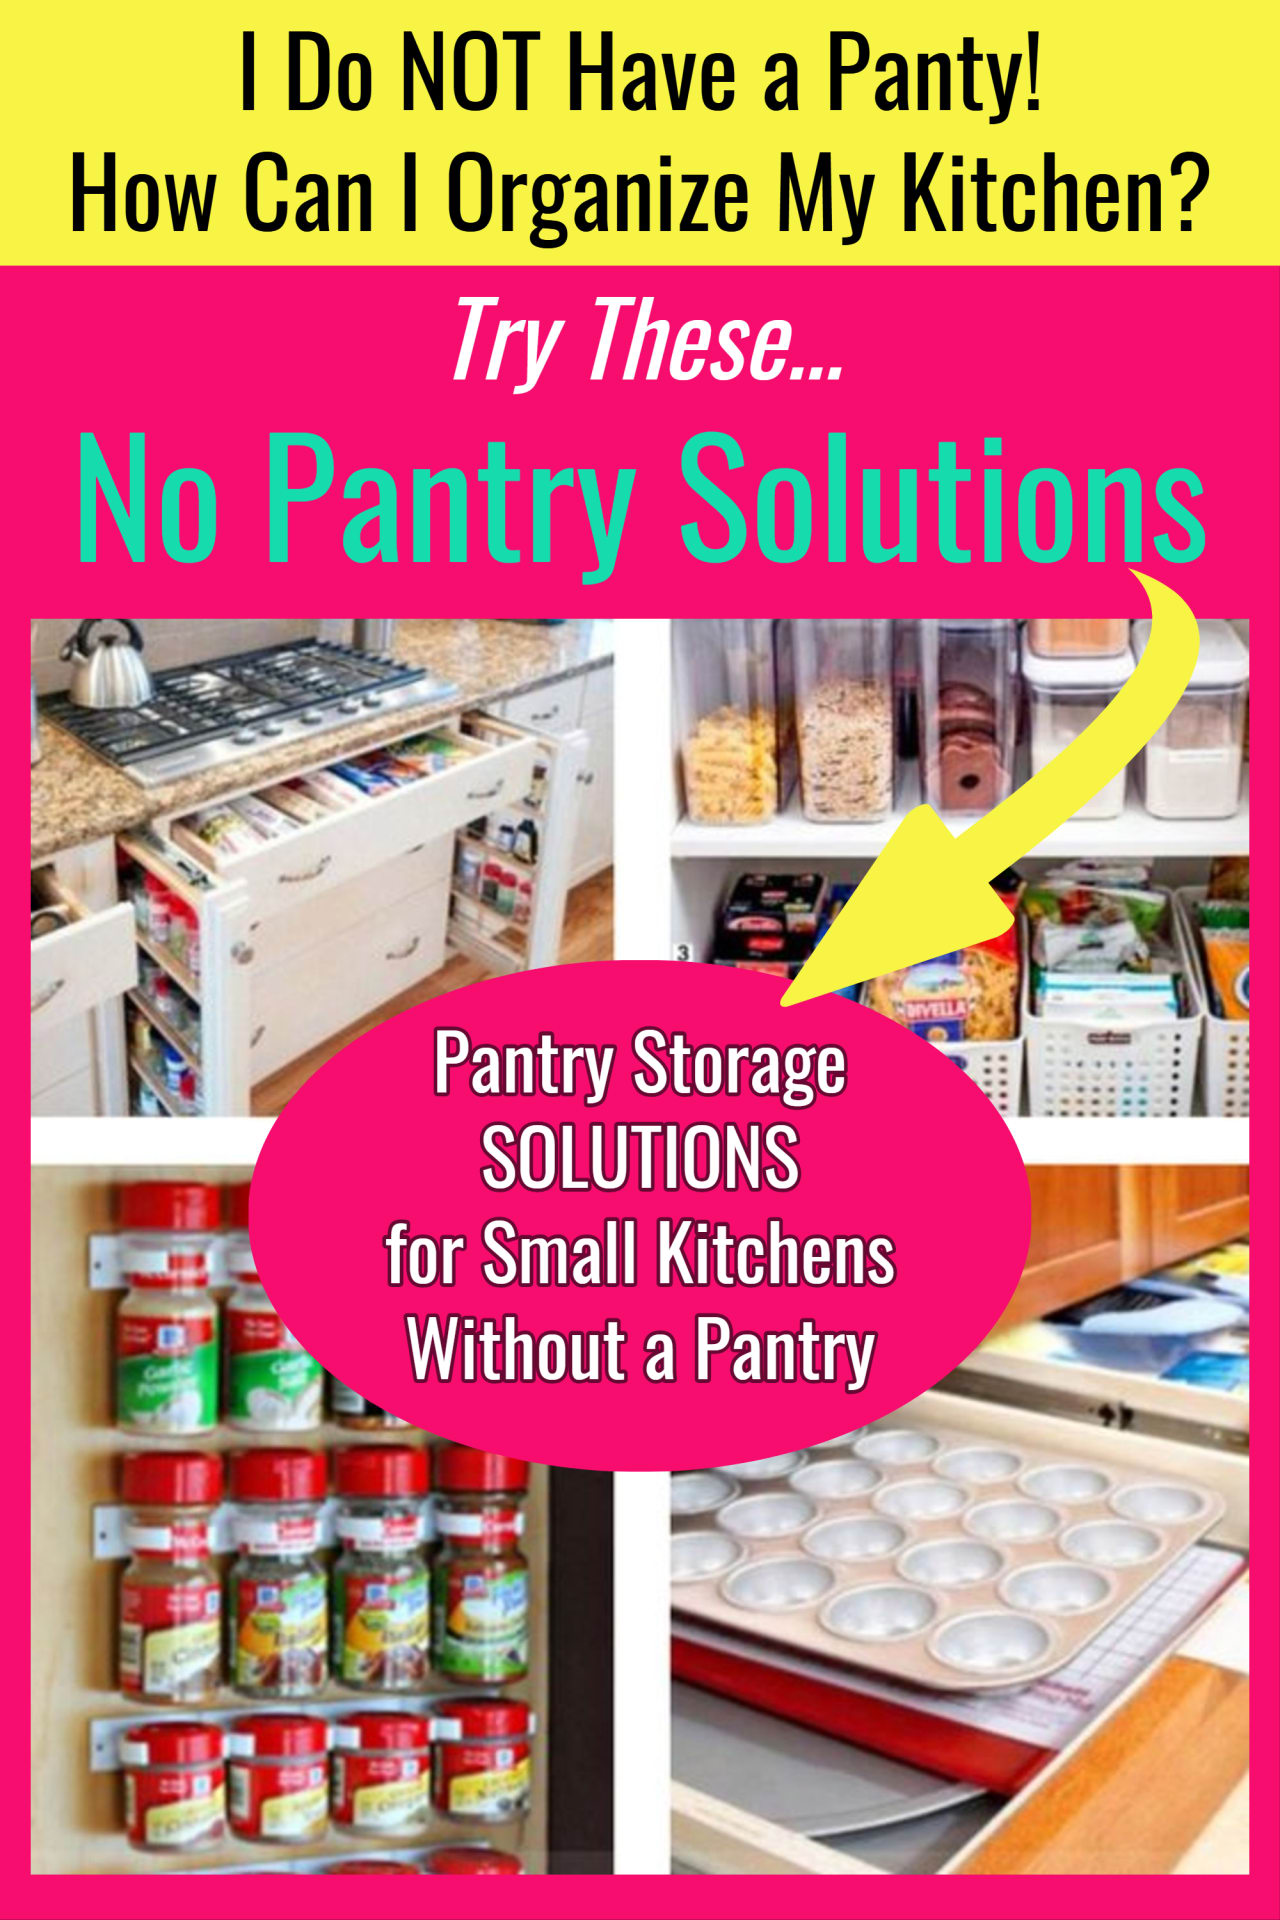 Kitchen pantry organization hacks for when you do NOT have a kitchen pantry area. Wish you had a small kitchen pantry, but you need pantry alternatives?  Here's Help! No pantry ideas for small kitchens, apartment kitchen and other tiny kitchens that need no pantry solutions.  If you need pantry ideas for small spaces BUT you do NOT have a pantry in your kitchen, these are the kitchen storage and organization ideas for you!  Small kitchen solutions for the win!